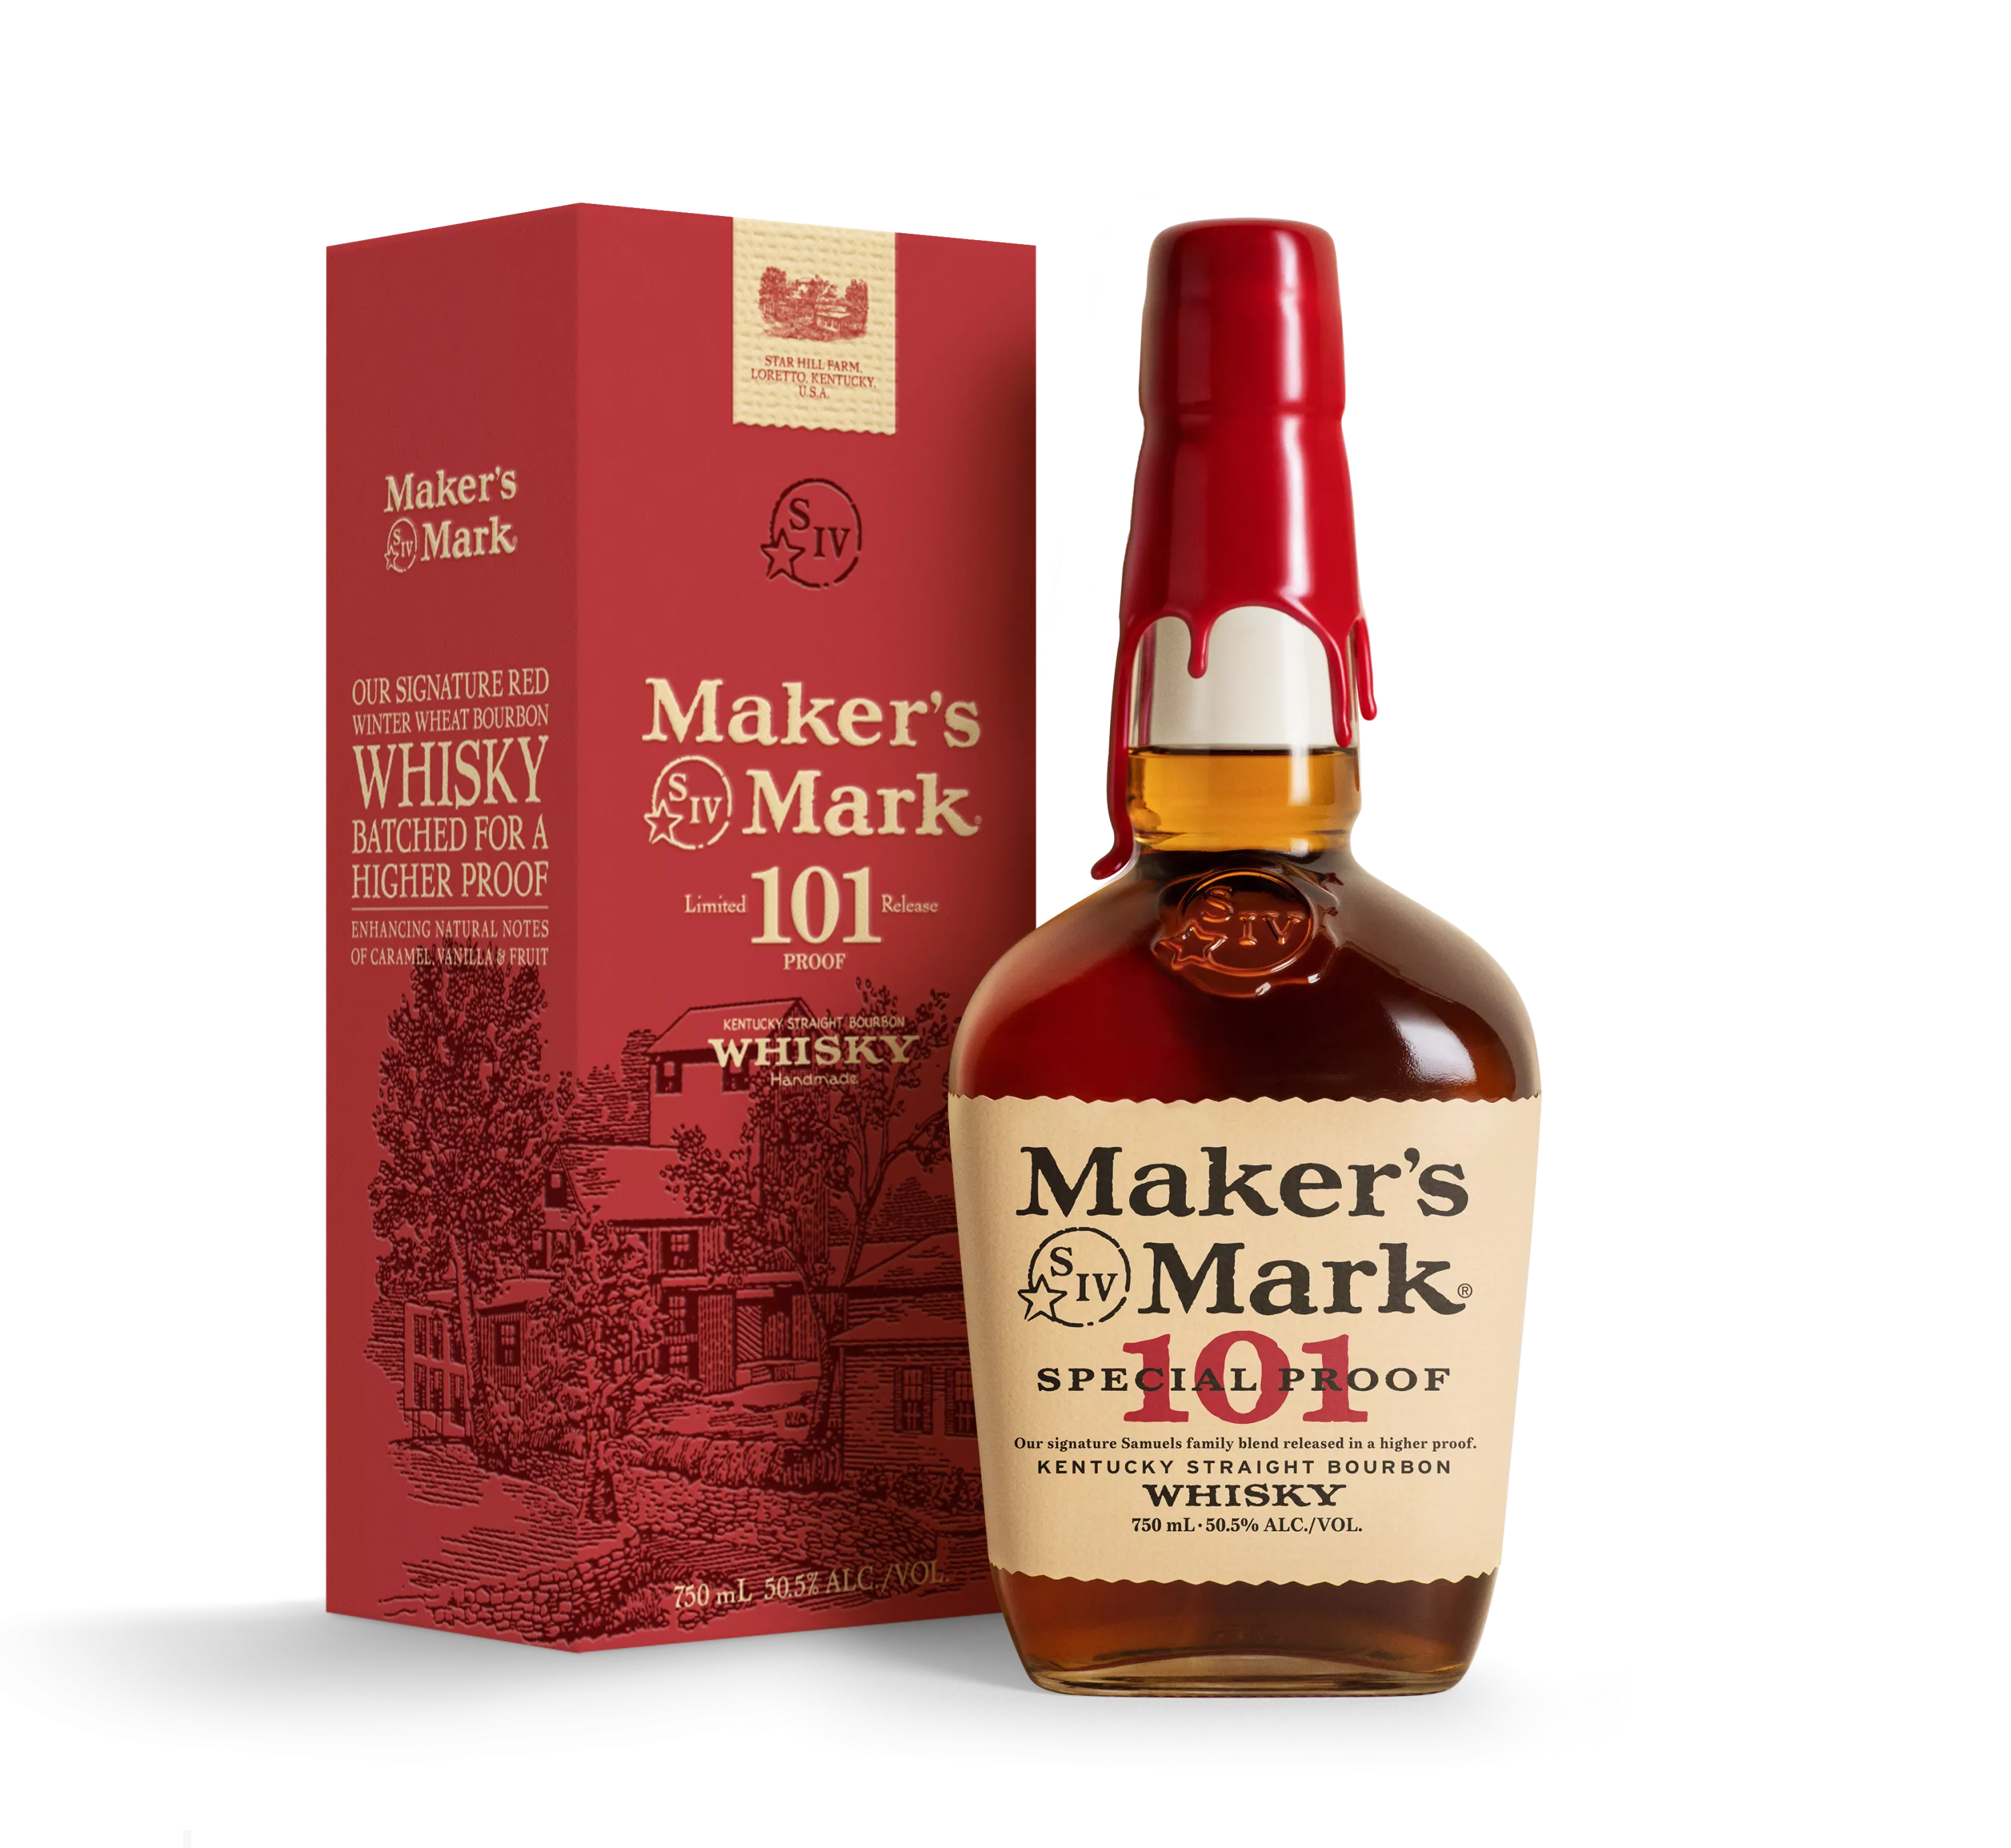 Bottle of makers mark 101 next to gifting box